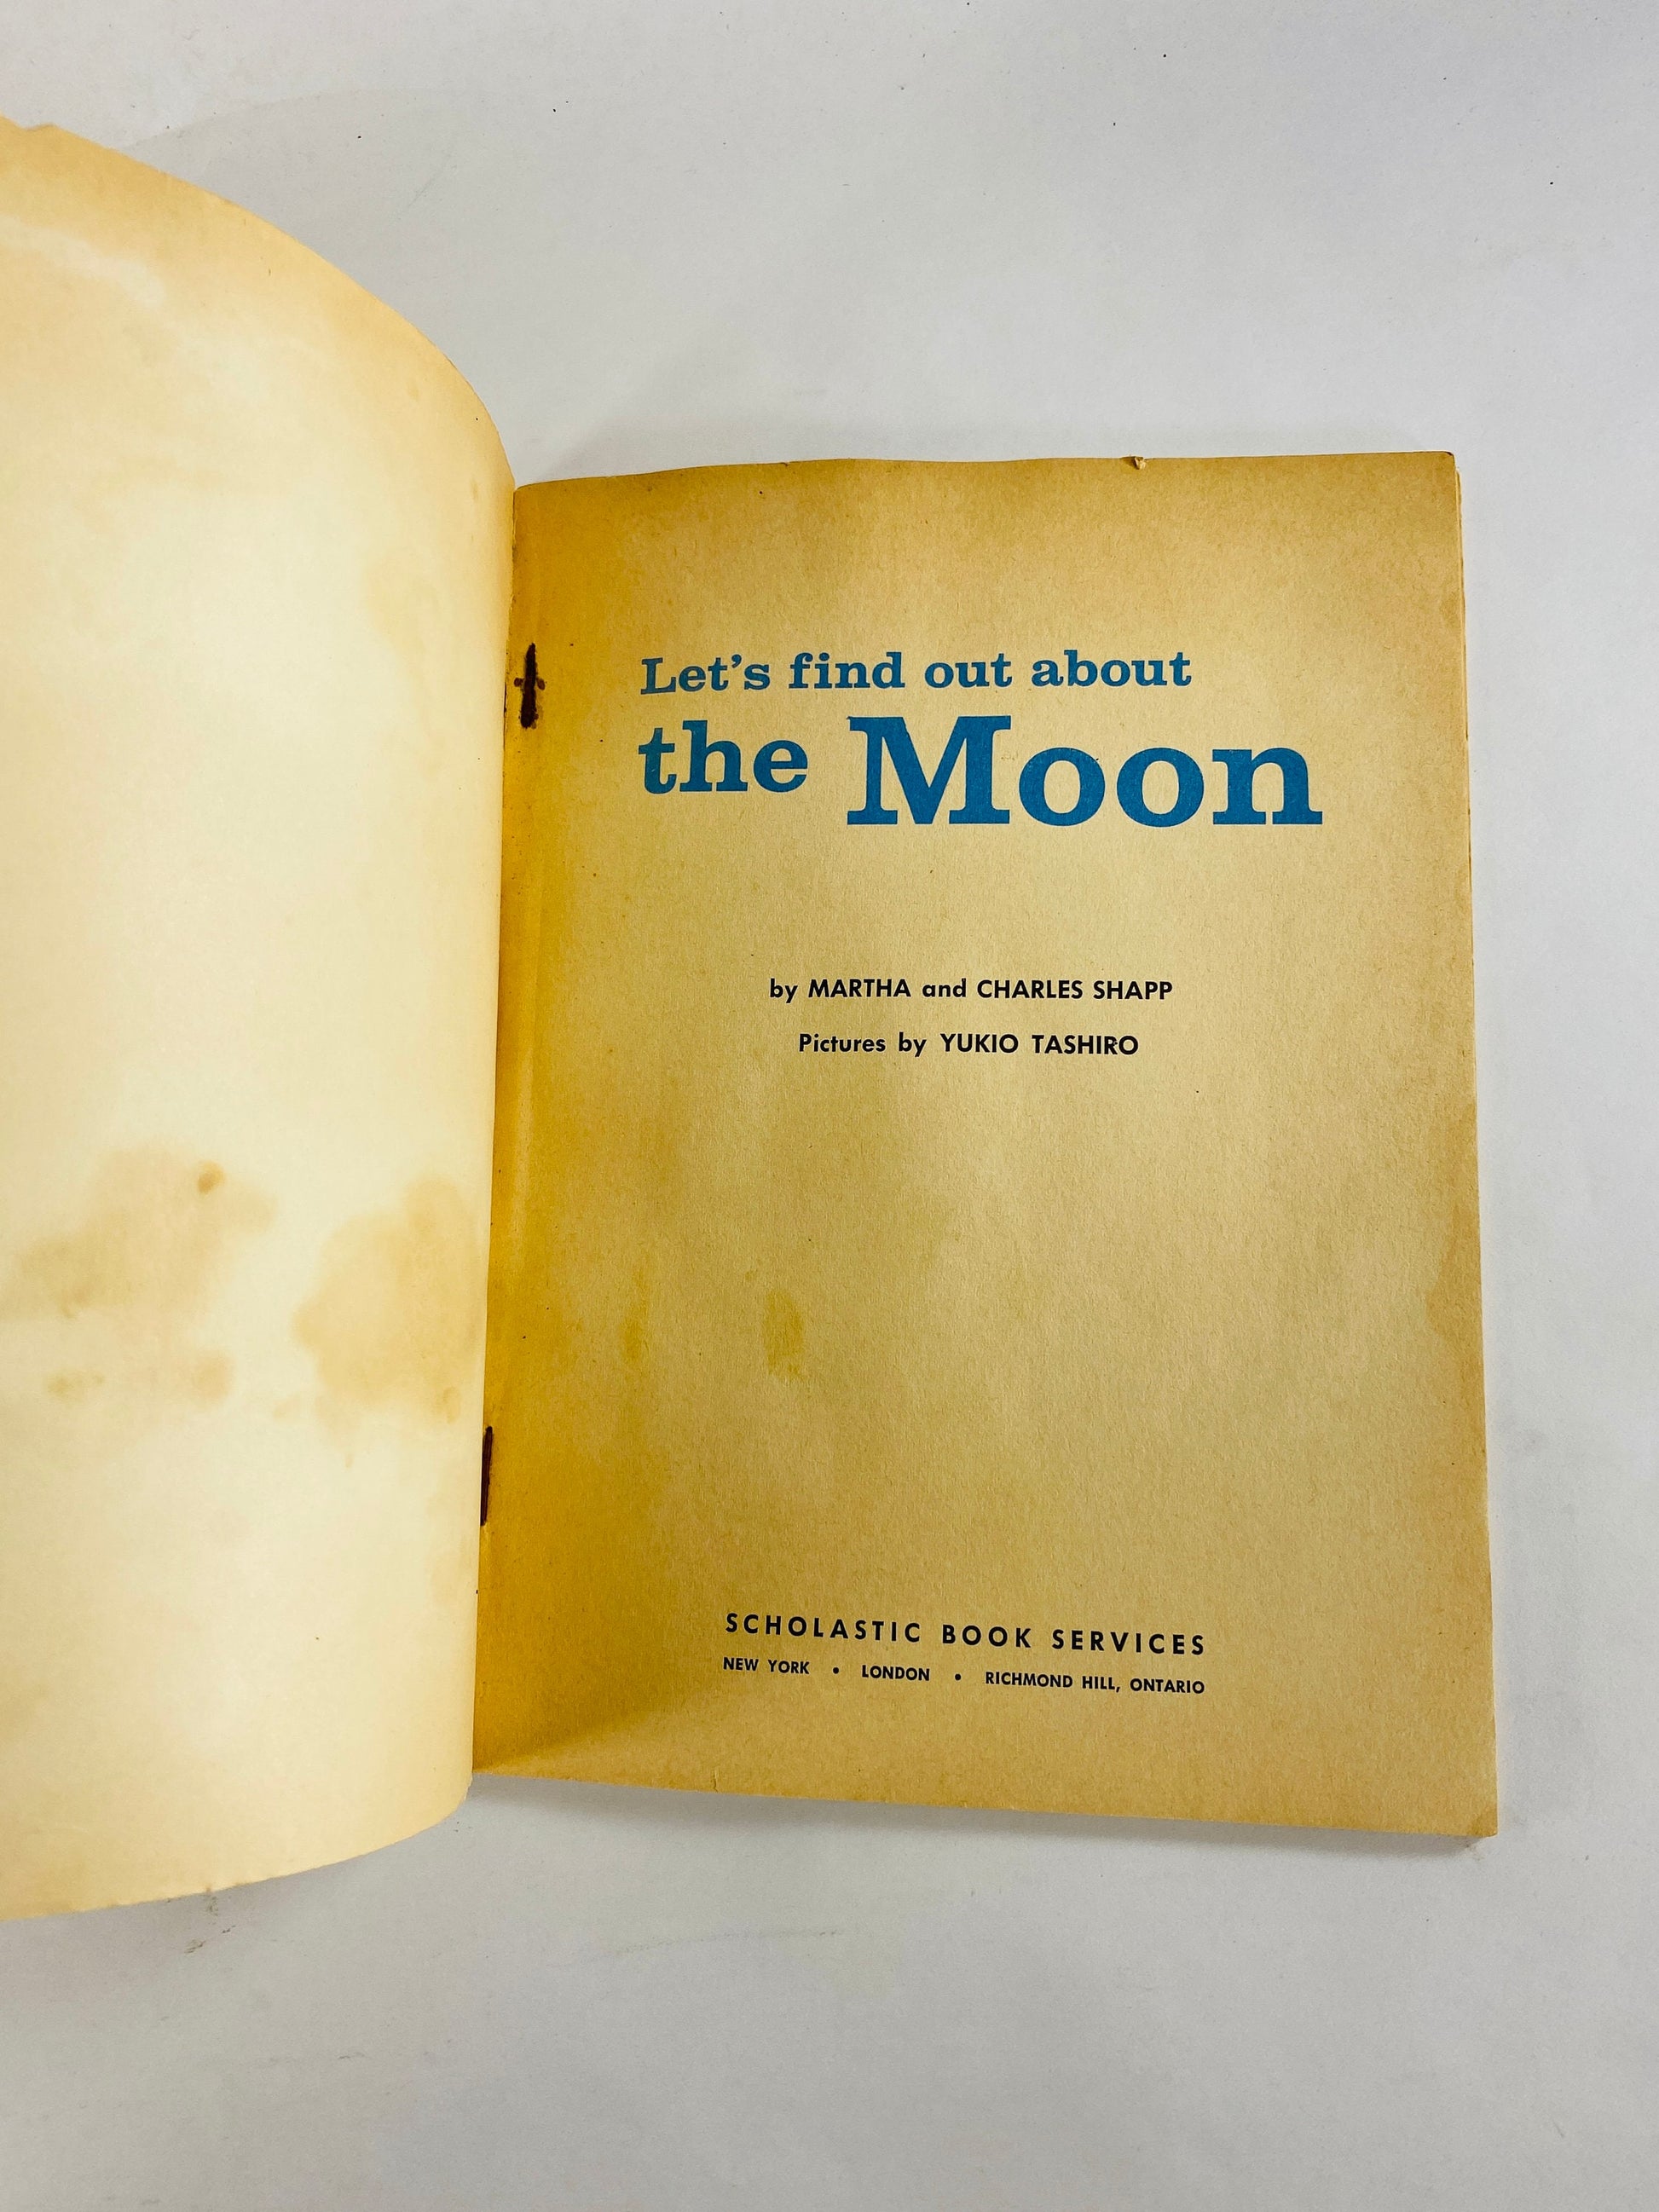 First Men on the Moon circa 1965 Franklin Watts. Vintage space exploration book about astronauts based on his own experience. Gift NASA